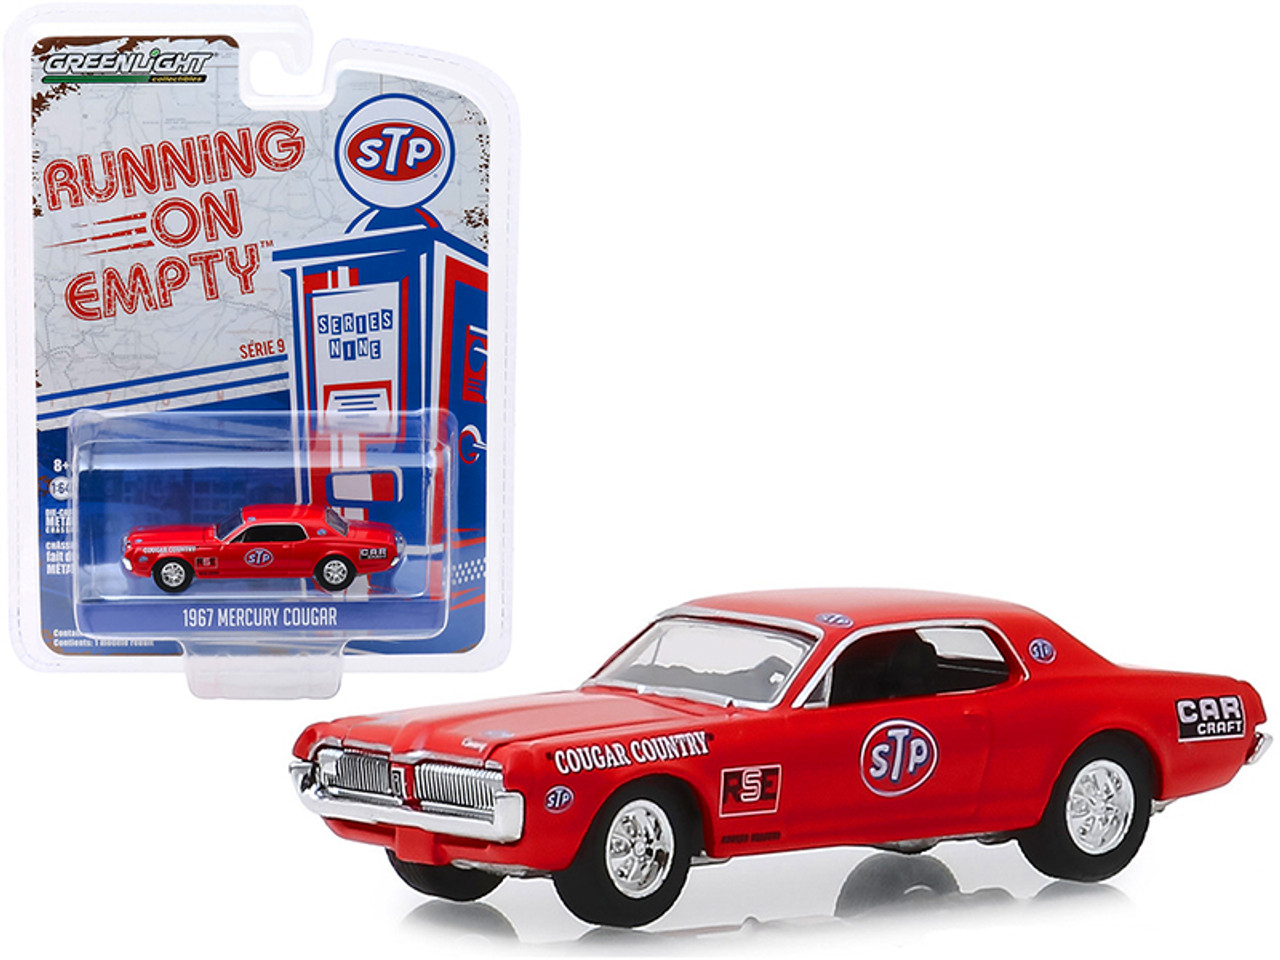 1967 Mercury Cougar Red "STP" "Cougar Country" "Running on Empty" Series 9 1/64 Diecast Model Car by Greenlight